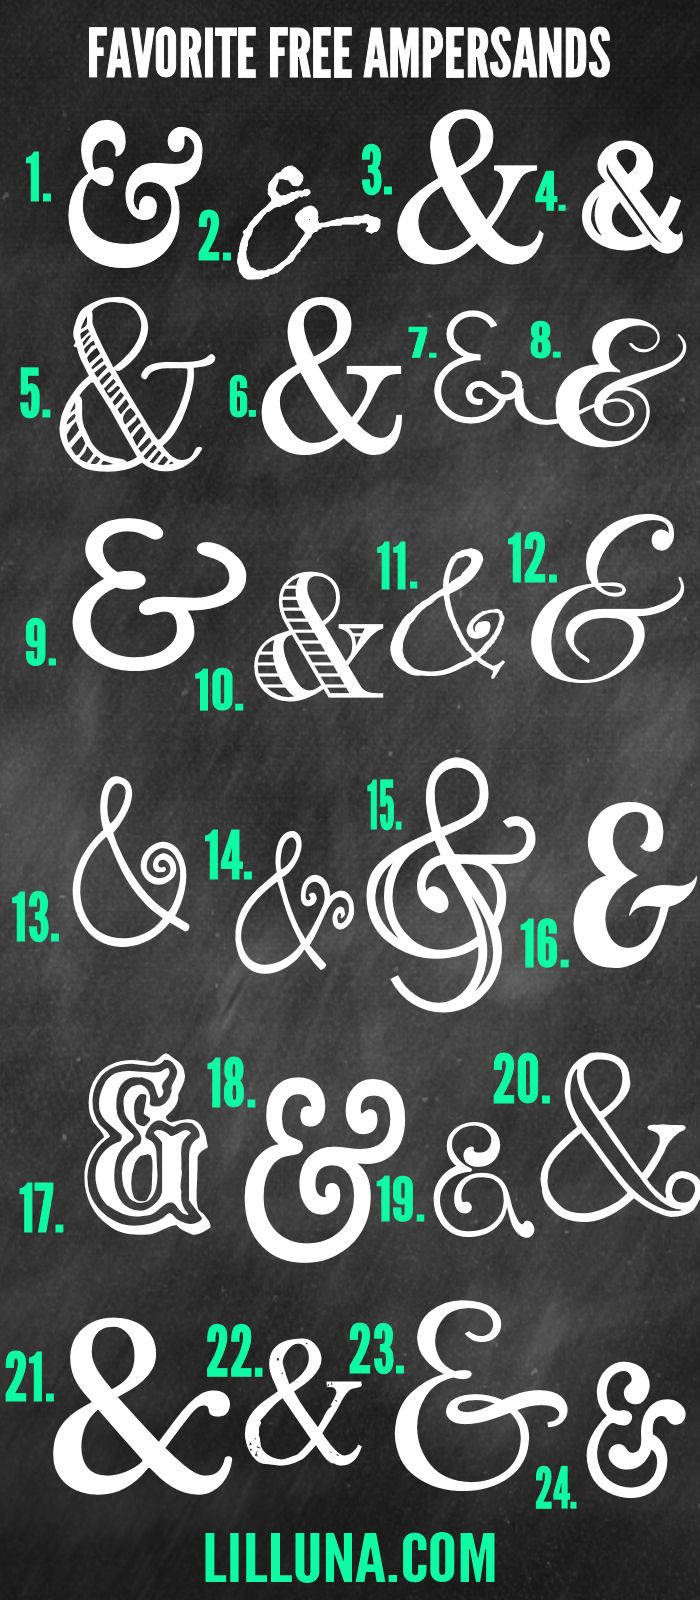 Favorite FREE Ampersands to download and use for graphics and printables { lilluna.com } 